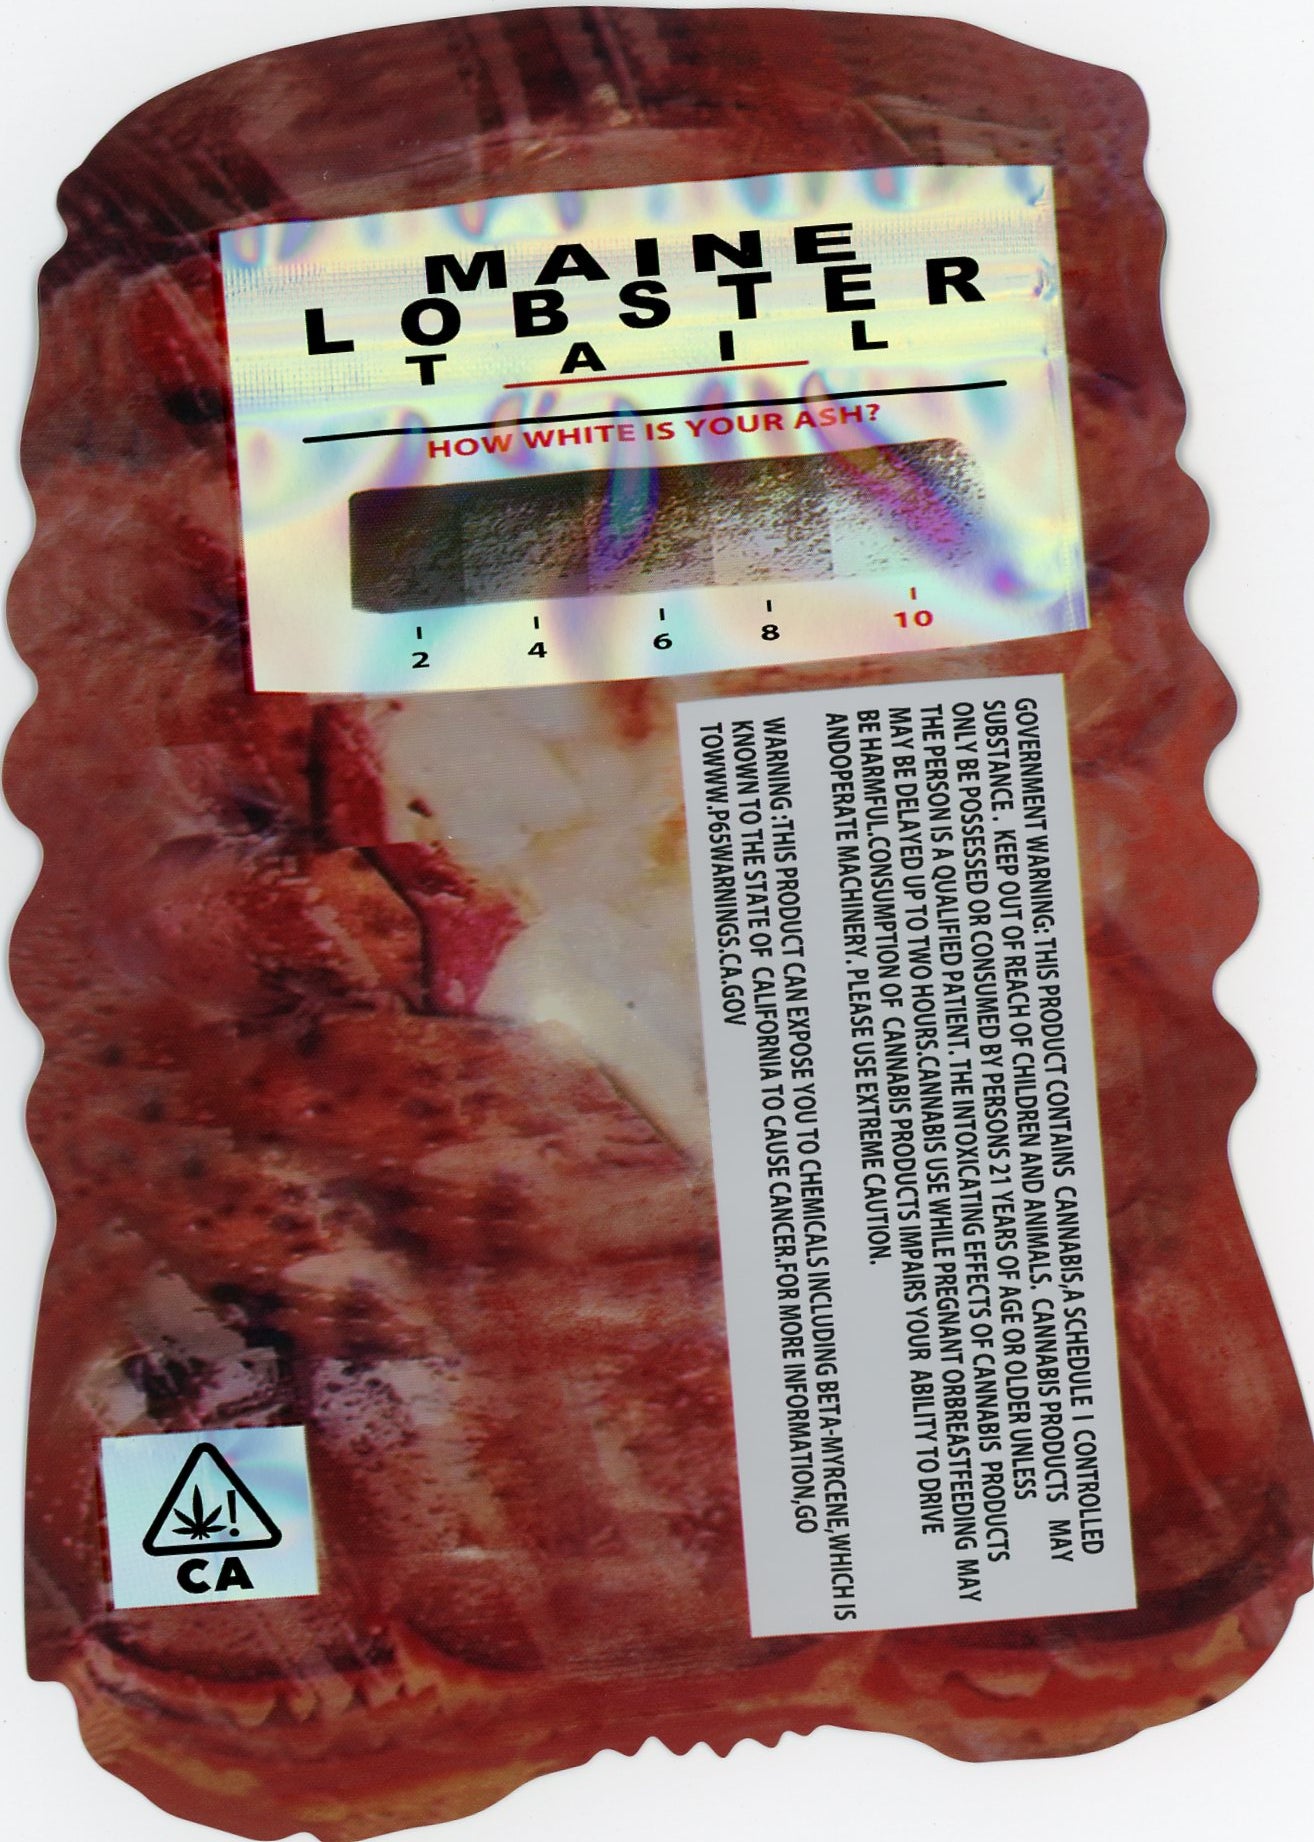 Maine Lobster Tail Mylar Bags 3.5g Grams The Ten Co Die-Cut Holographic Spot UV Mylar Bag Fire Mylar